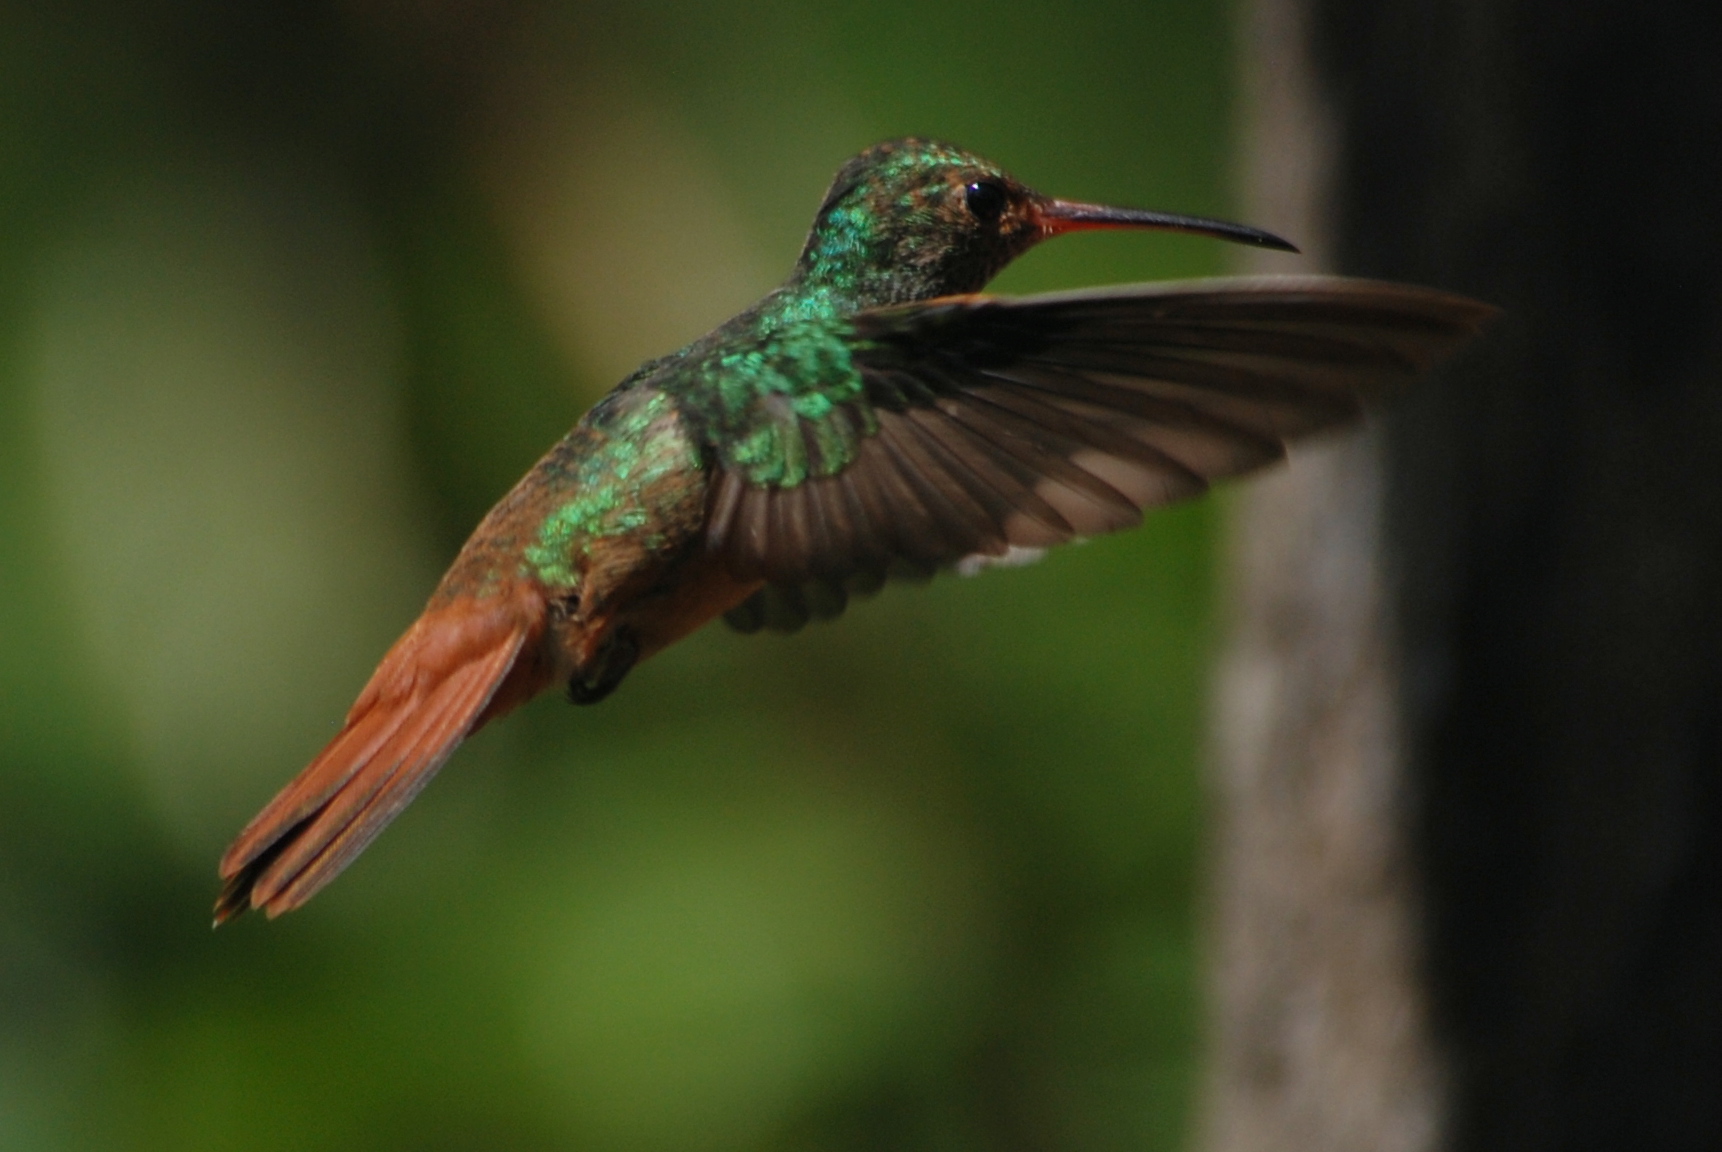 Click picture to see more Rufous-tailed Hummingbirds.